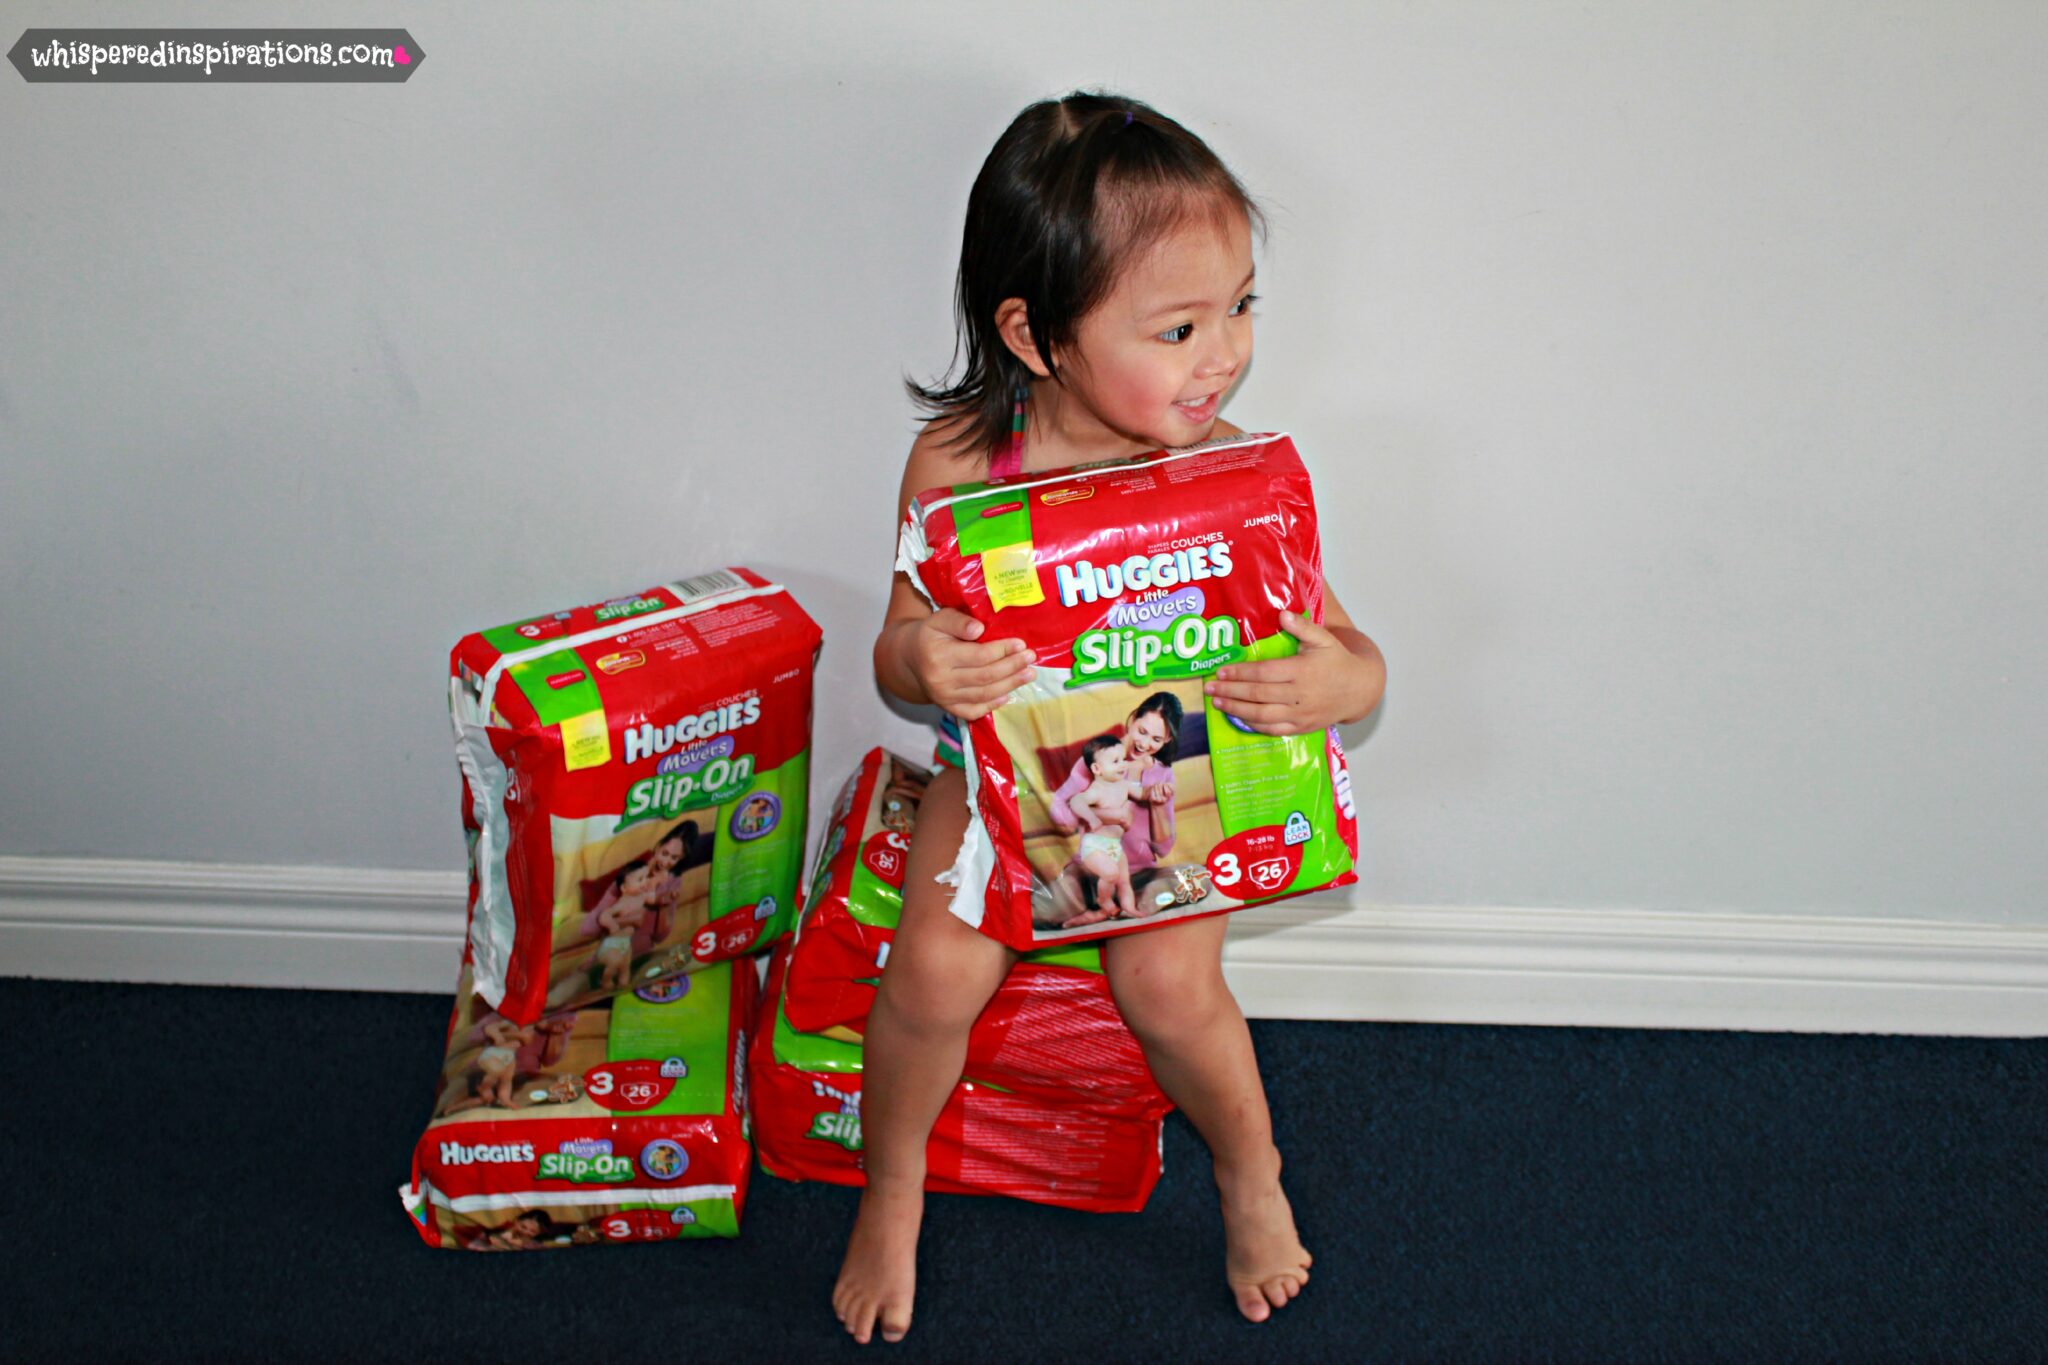 Huggies Little Movers Slip-On Diapers: Your Standing Baby Deserves an Outstanding Fit! #FirstFitw